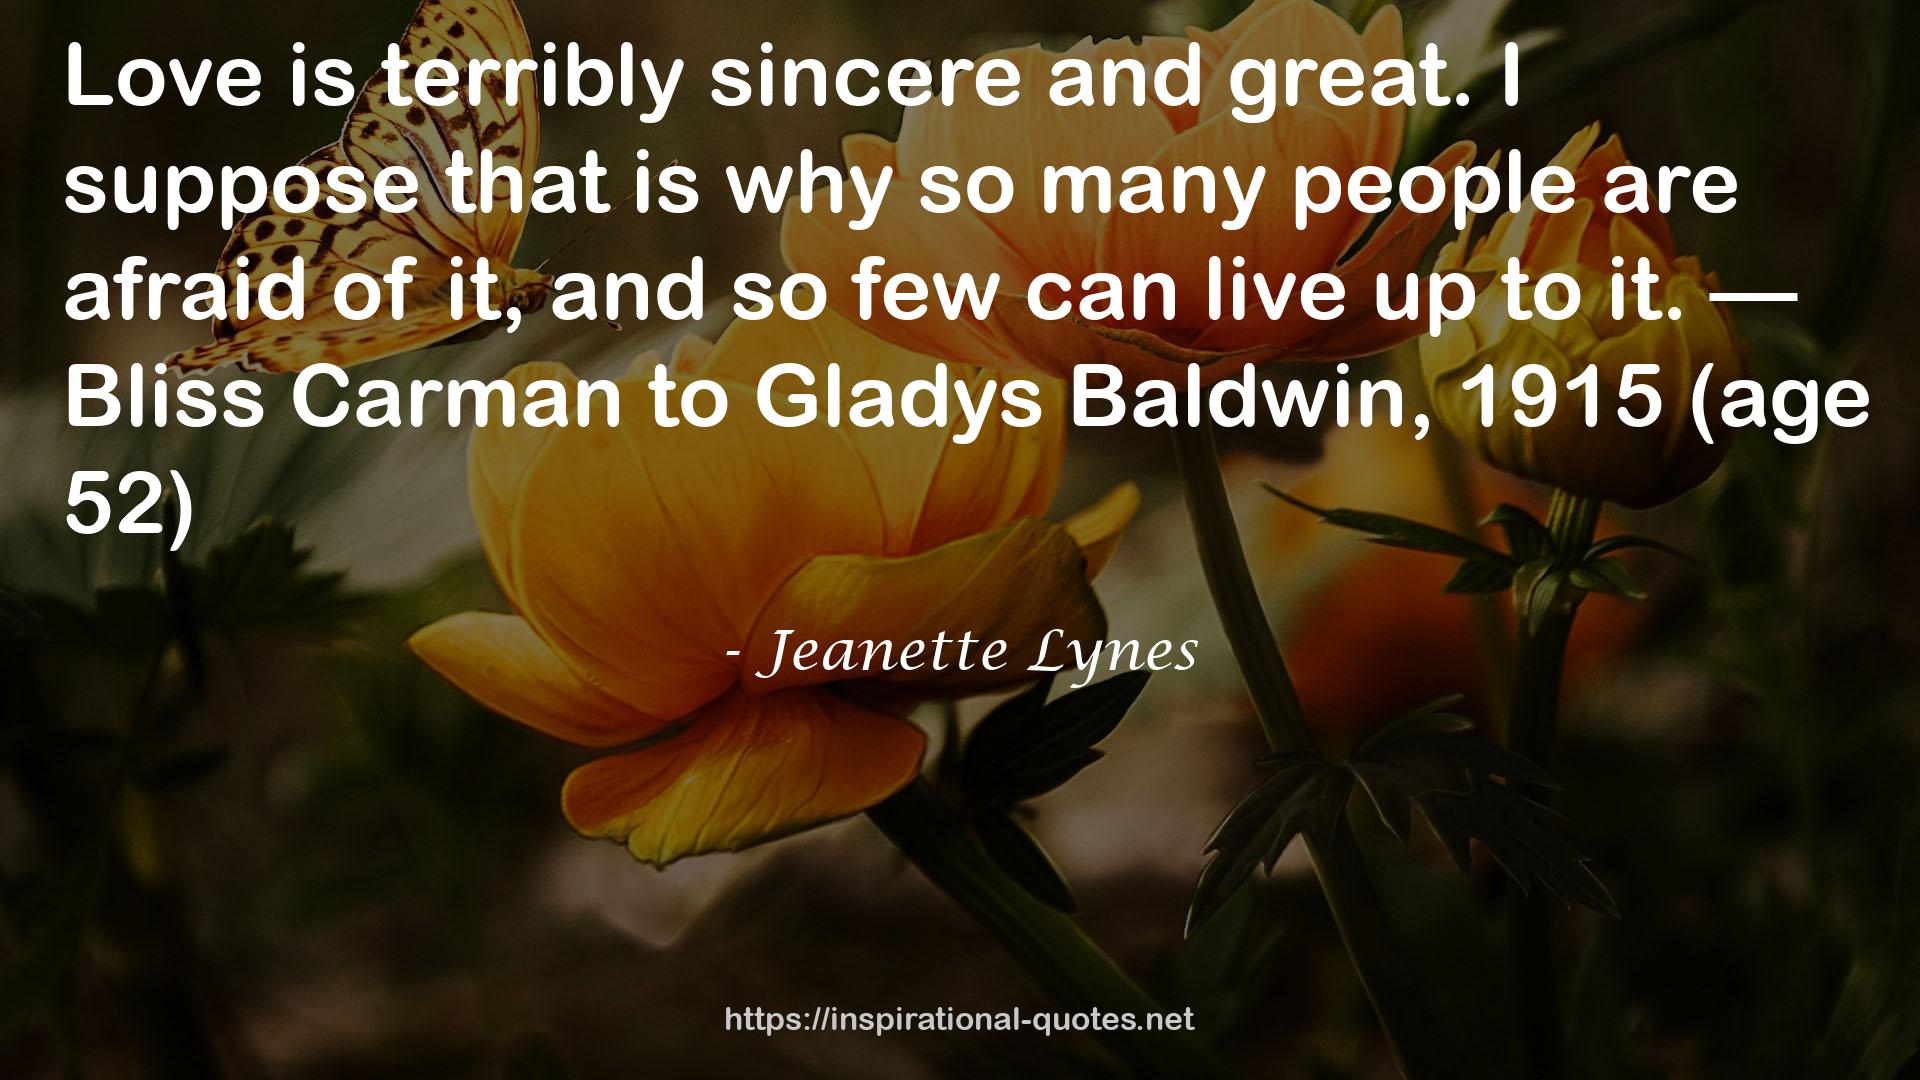 Jeanette Lynes QUOTES